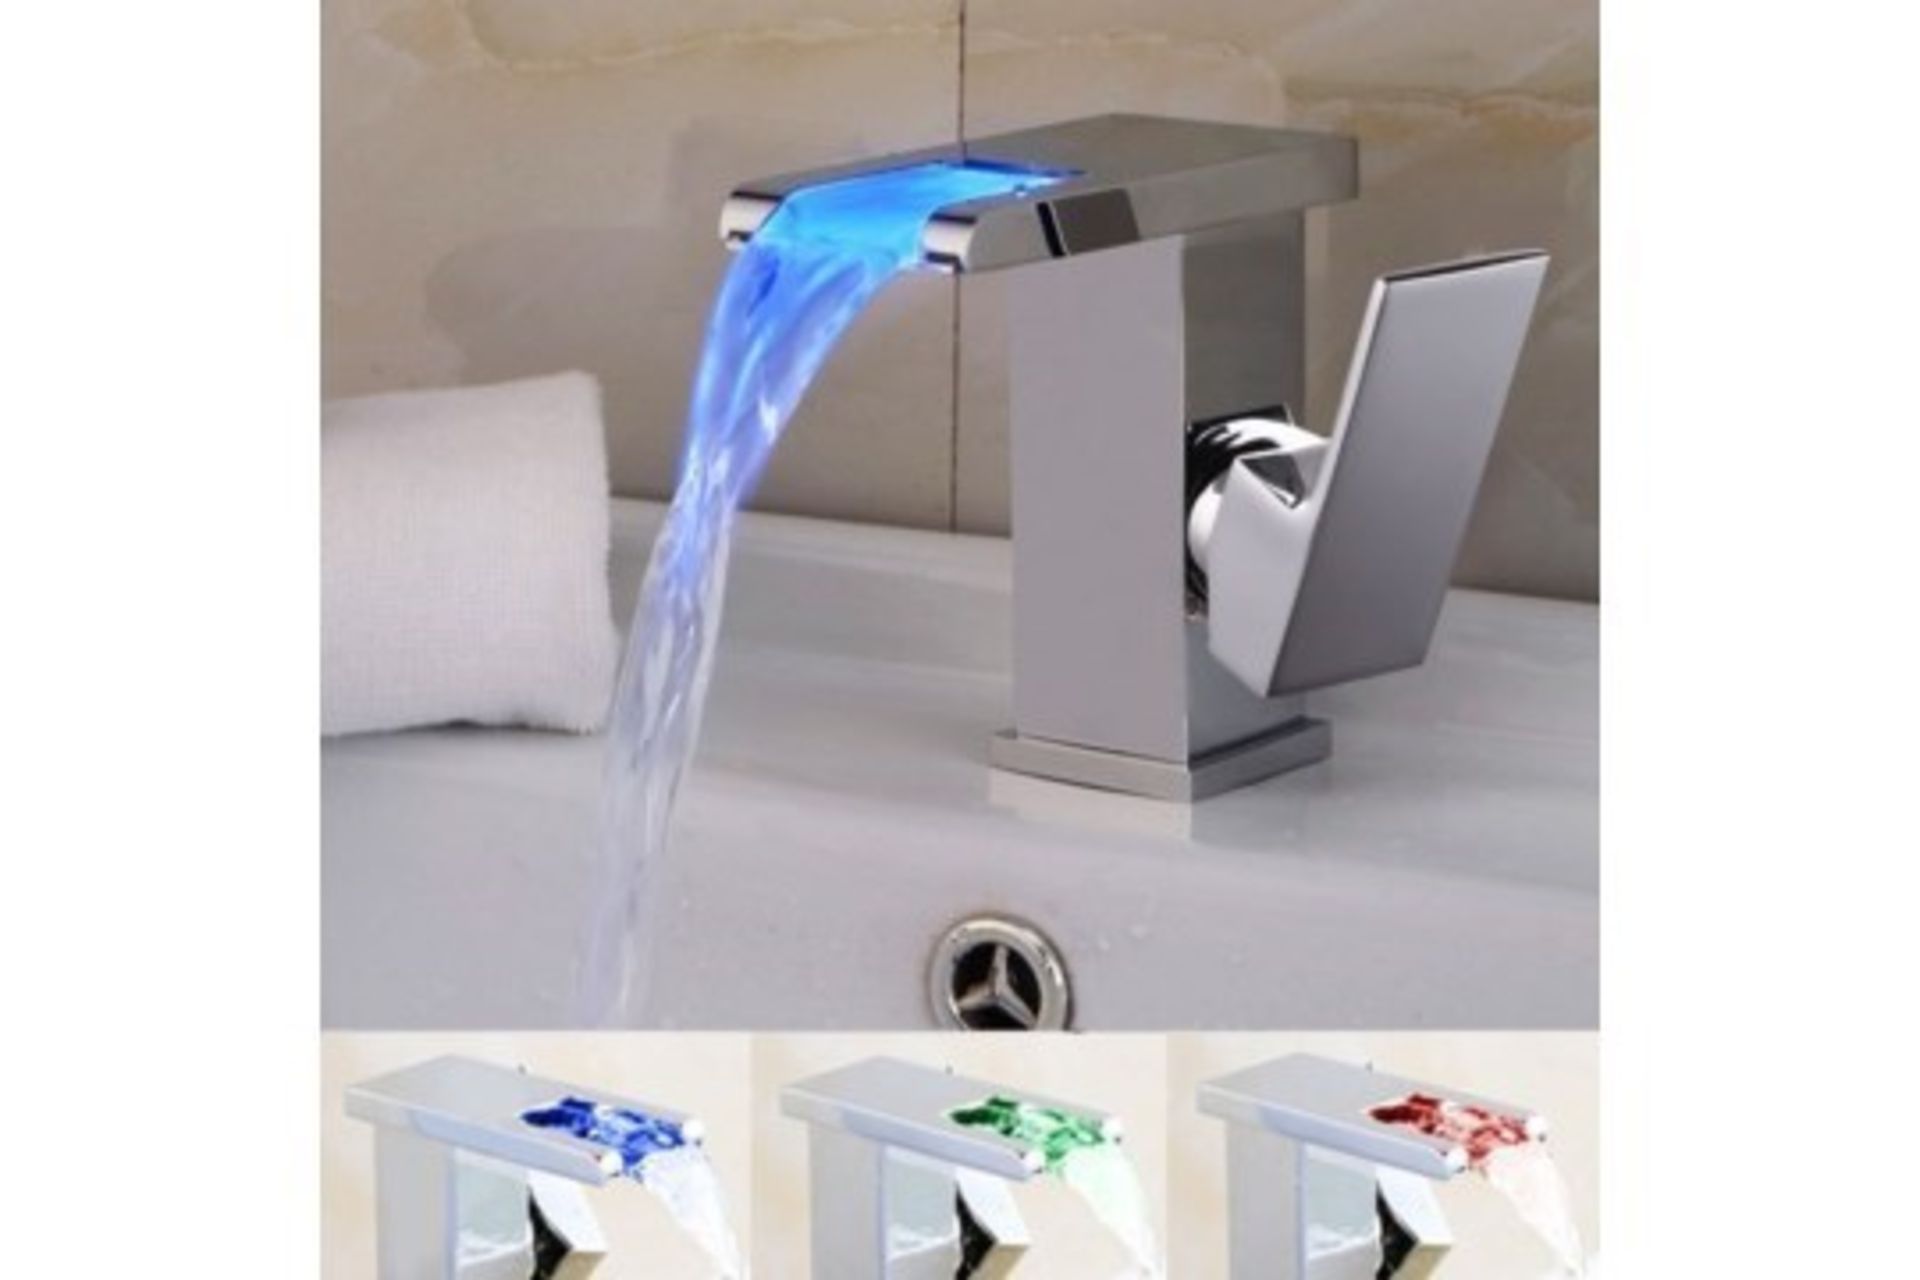 LED Waterfall Bathroom Basin Mixer Tap. RRP £229.99.Easy to install and clean. All copper ... LED